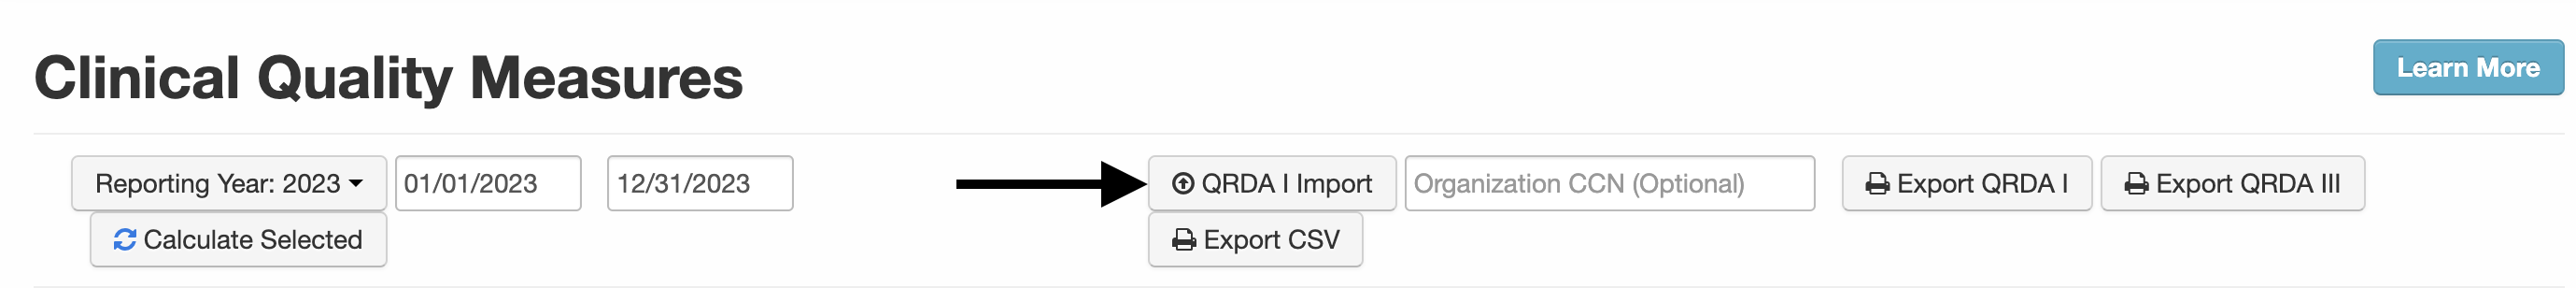 Clinical_Quality_Measures_QRDA_I_Import.png